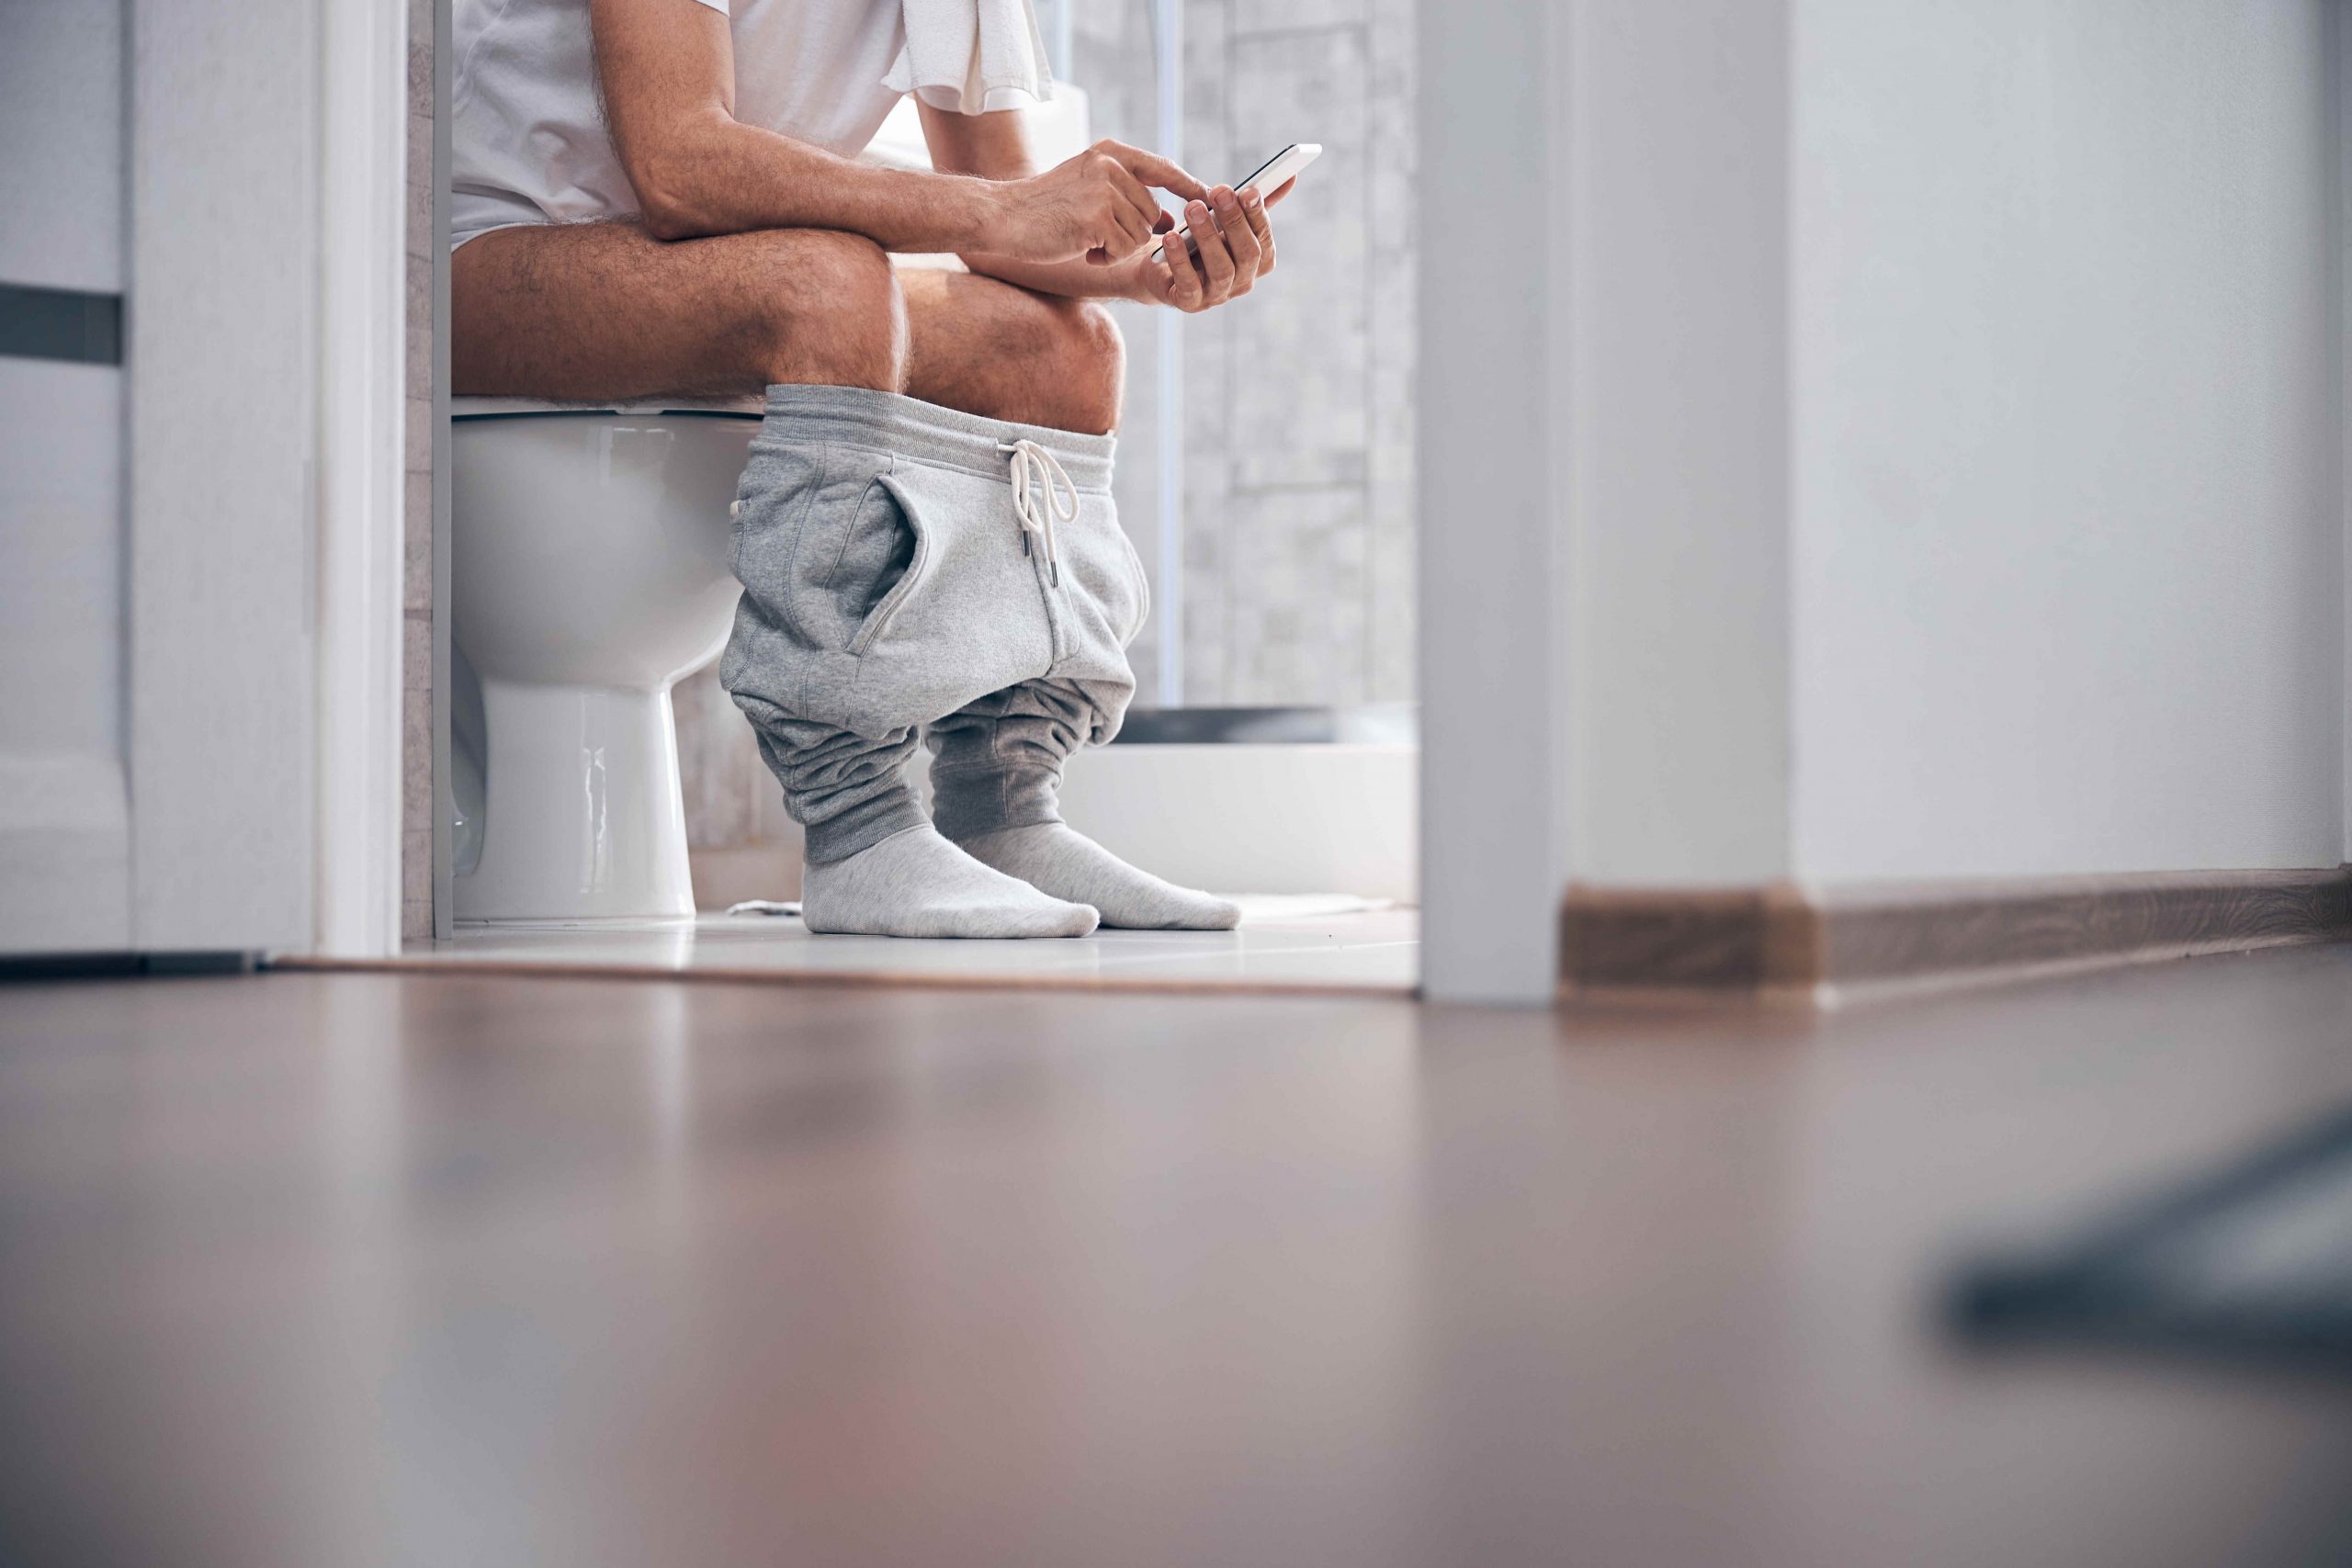 The picture shows a man sitting on the toilet